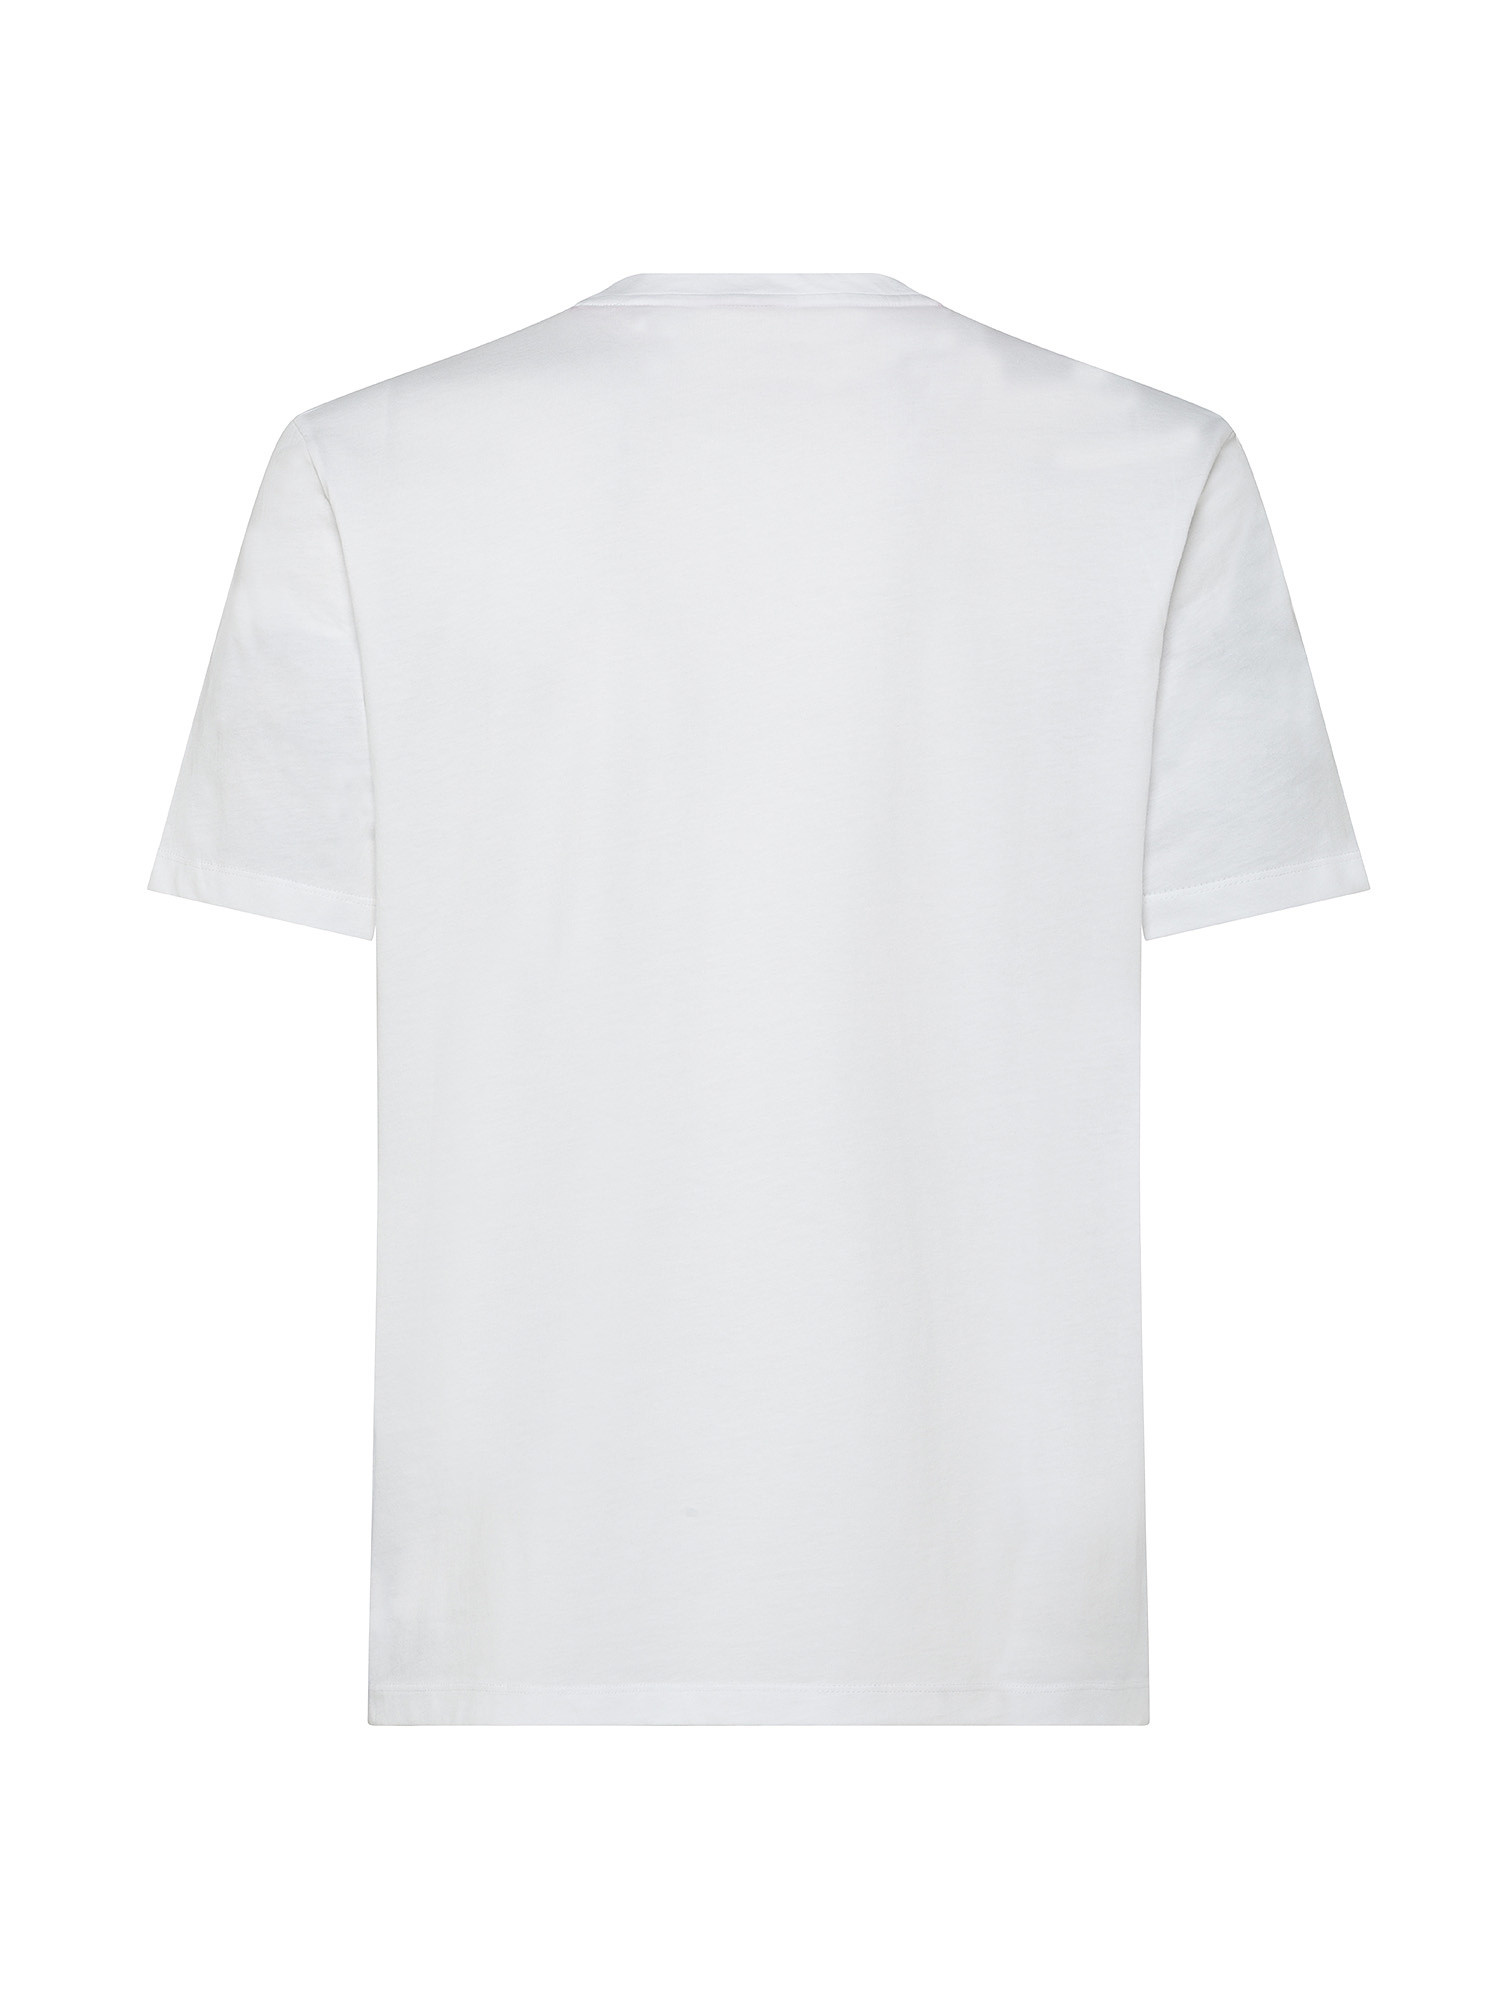 Hugo - T-shirt con logo in cotone, Bianco, large image number 1